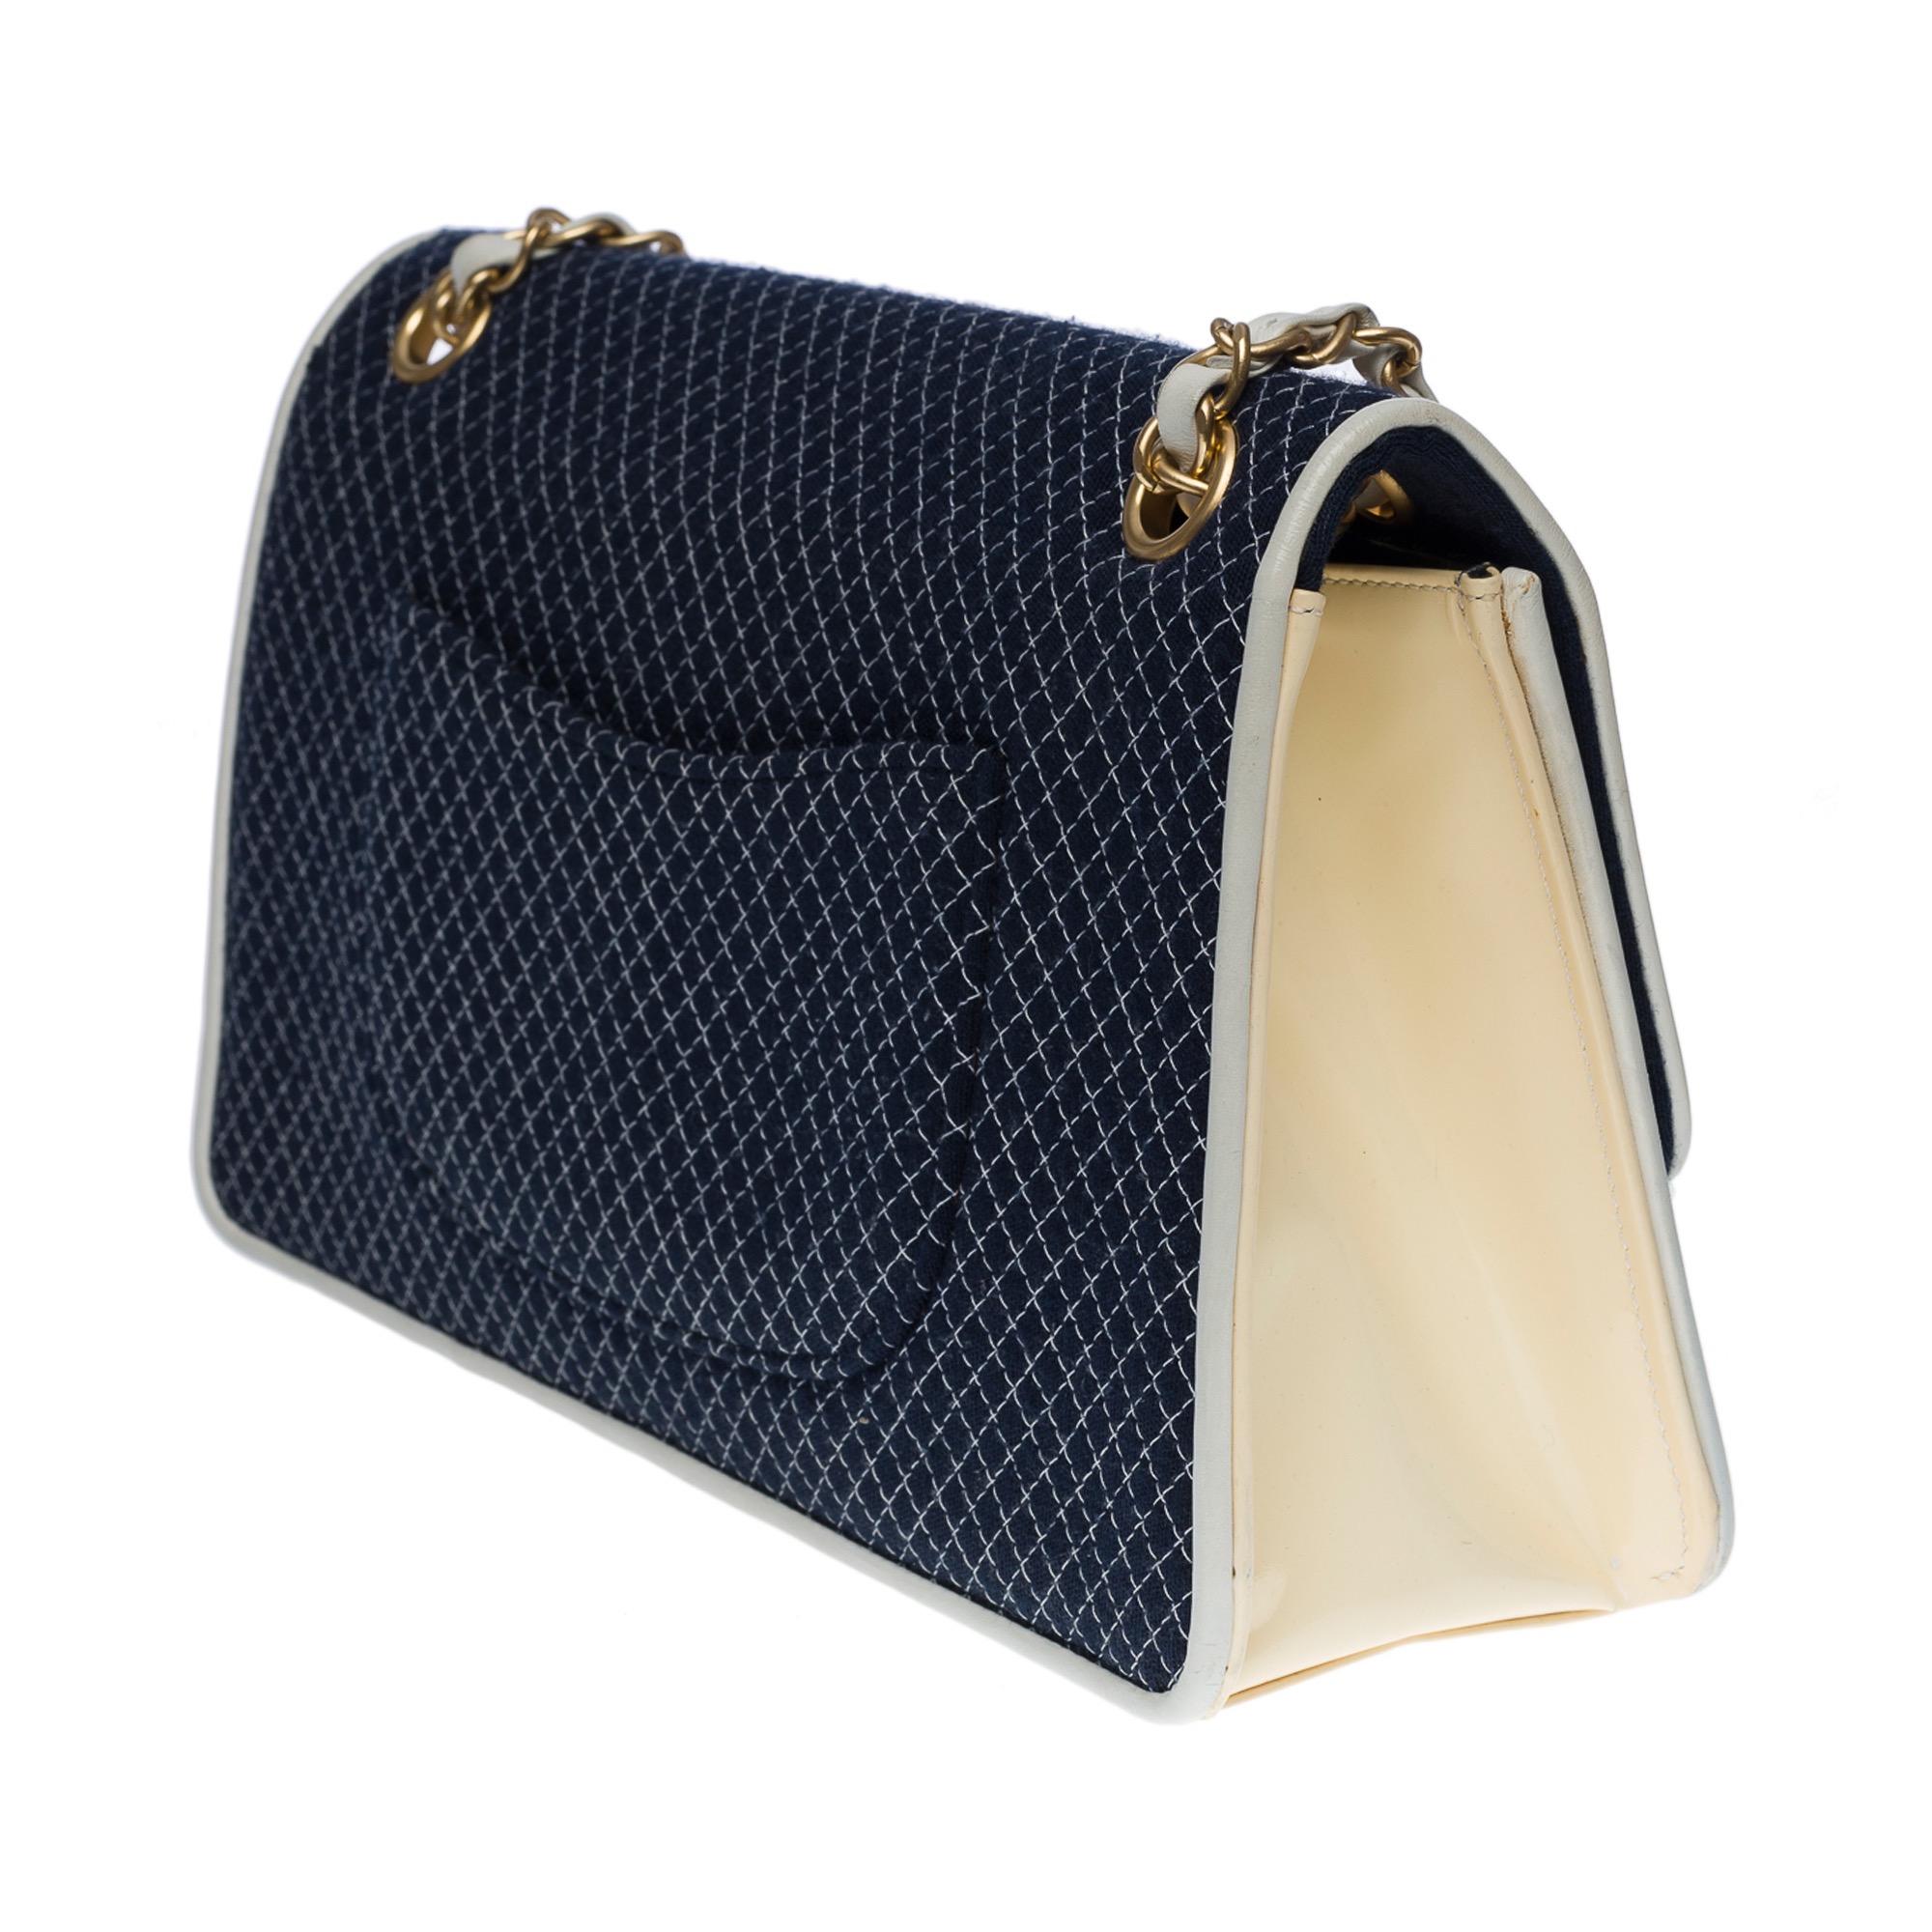 Women's Chanel Timeless/Classic shoulder bag in navy blue jersey, GHW For Sale